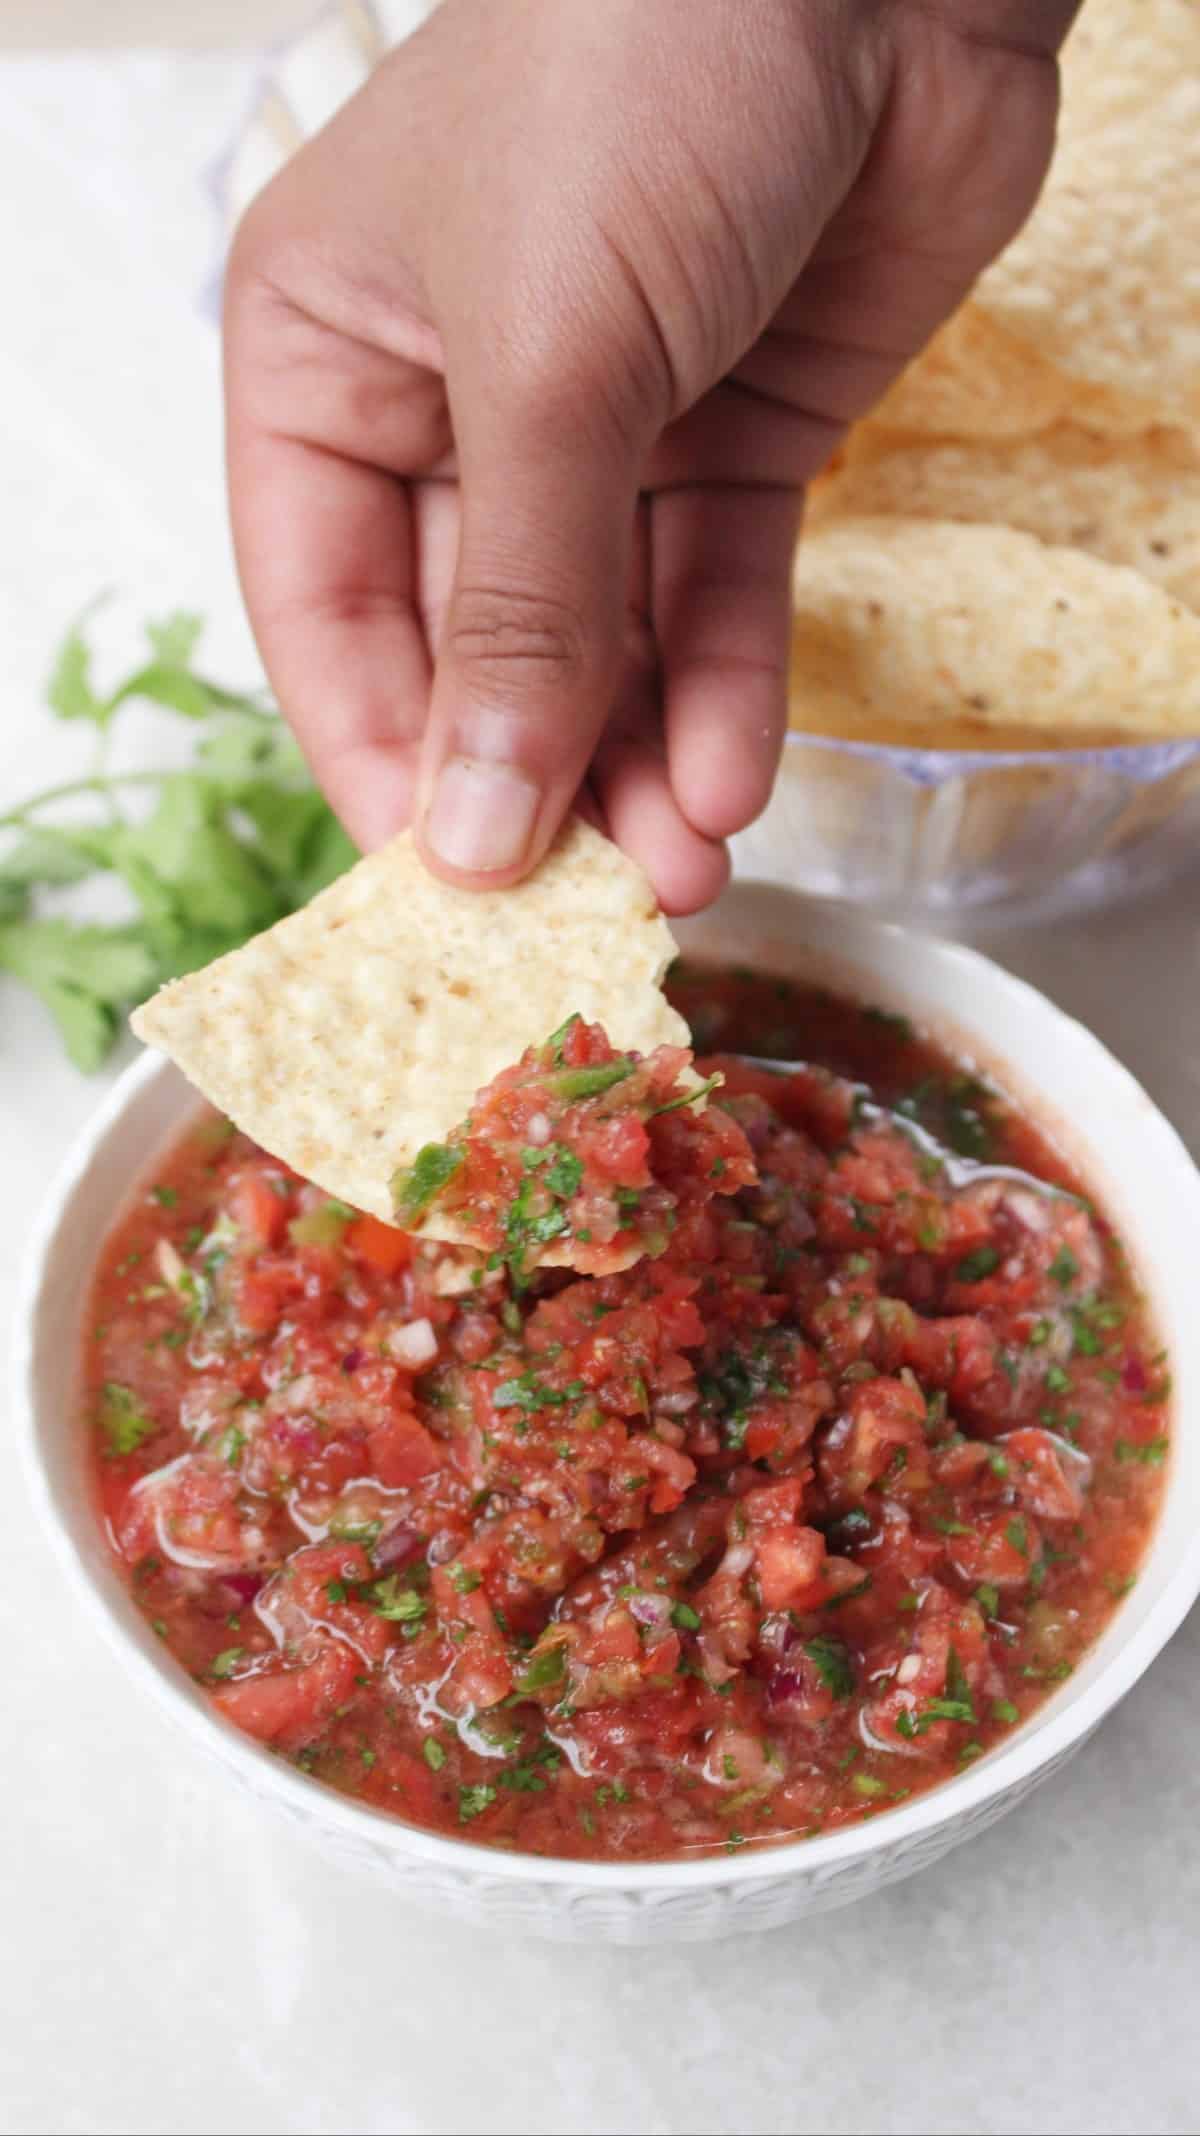 Tortilla chips scooping out tomato salsa from a white bowl